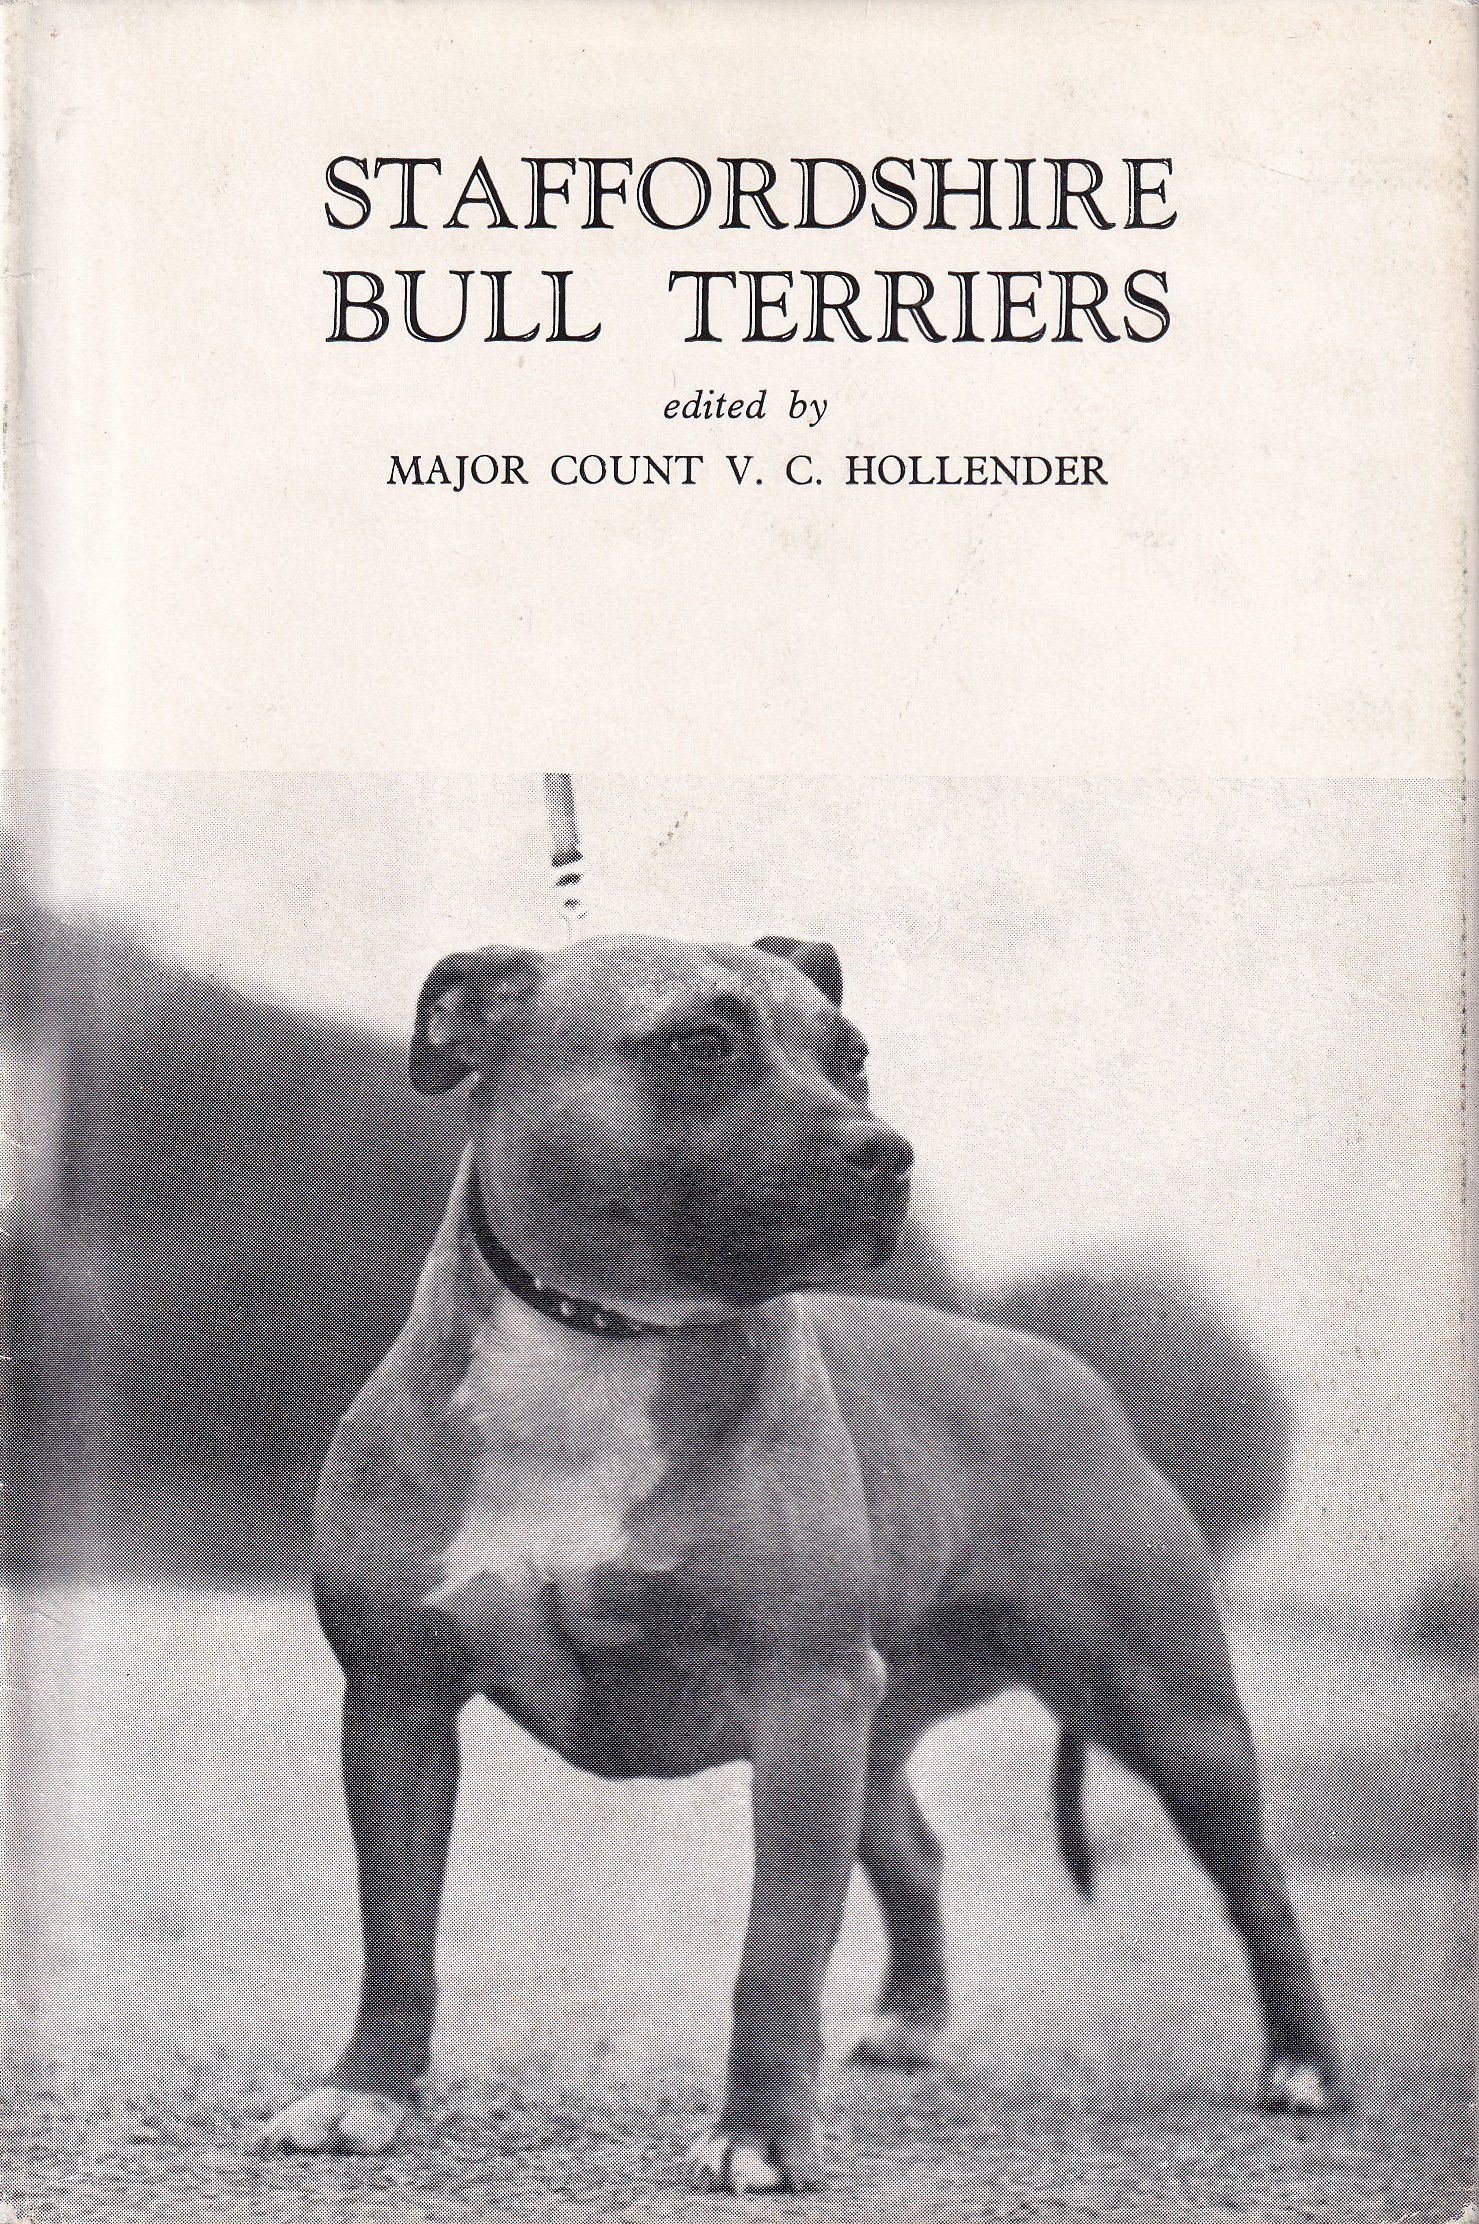 Staffordshire Bull Terriers edited by Major Count V.C. Hollender